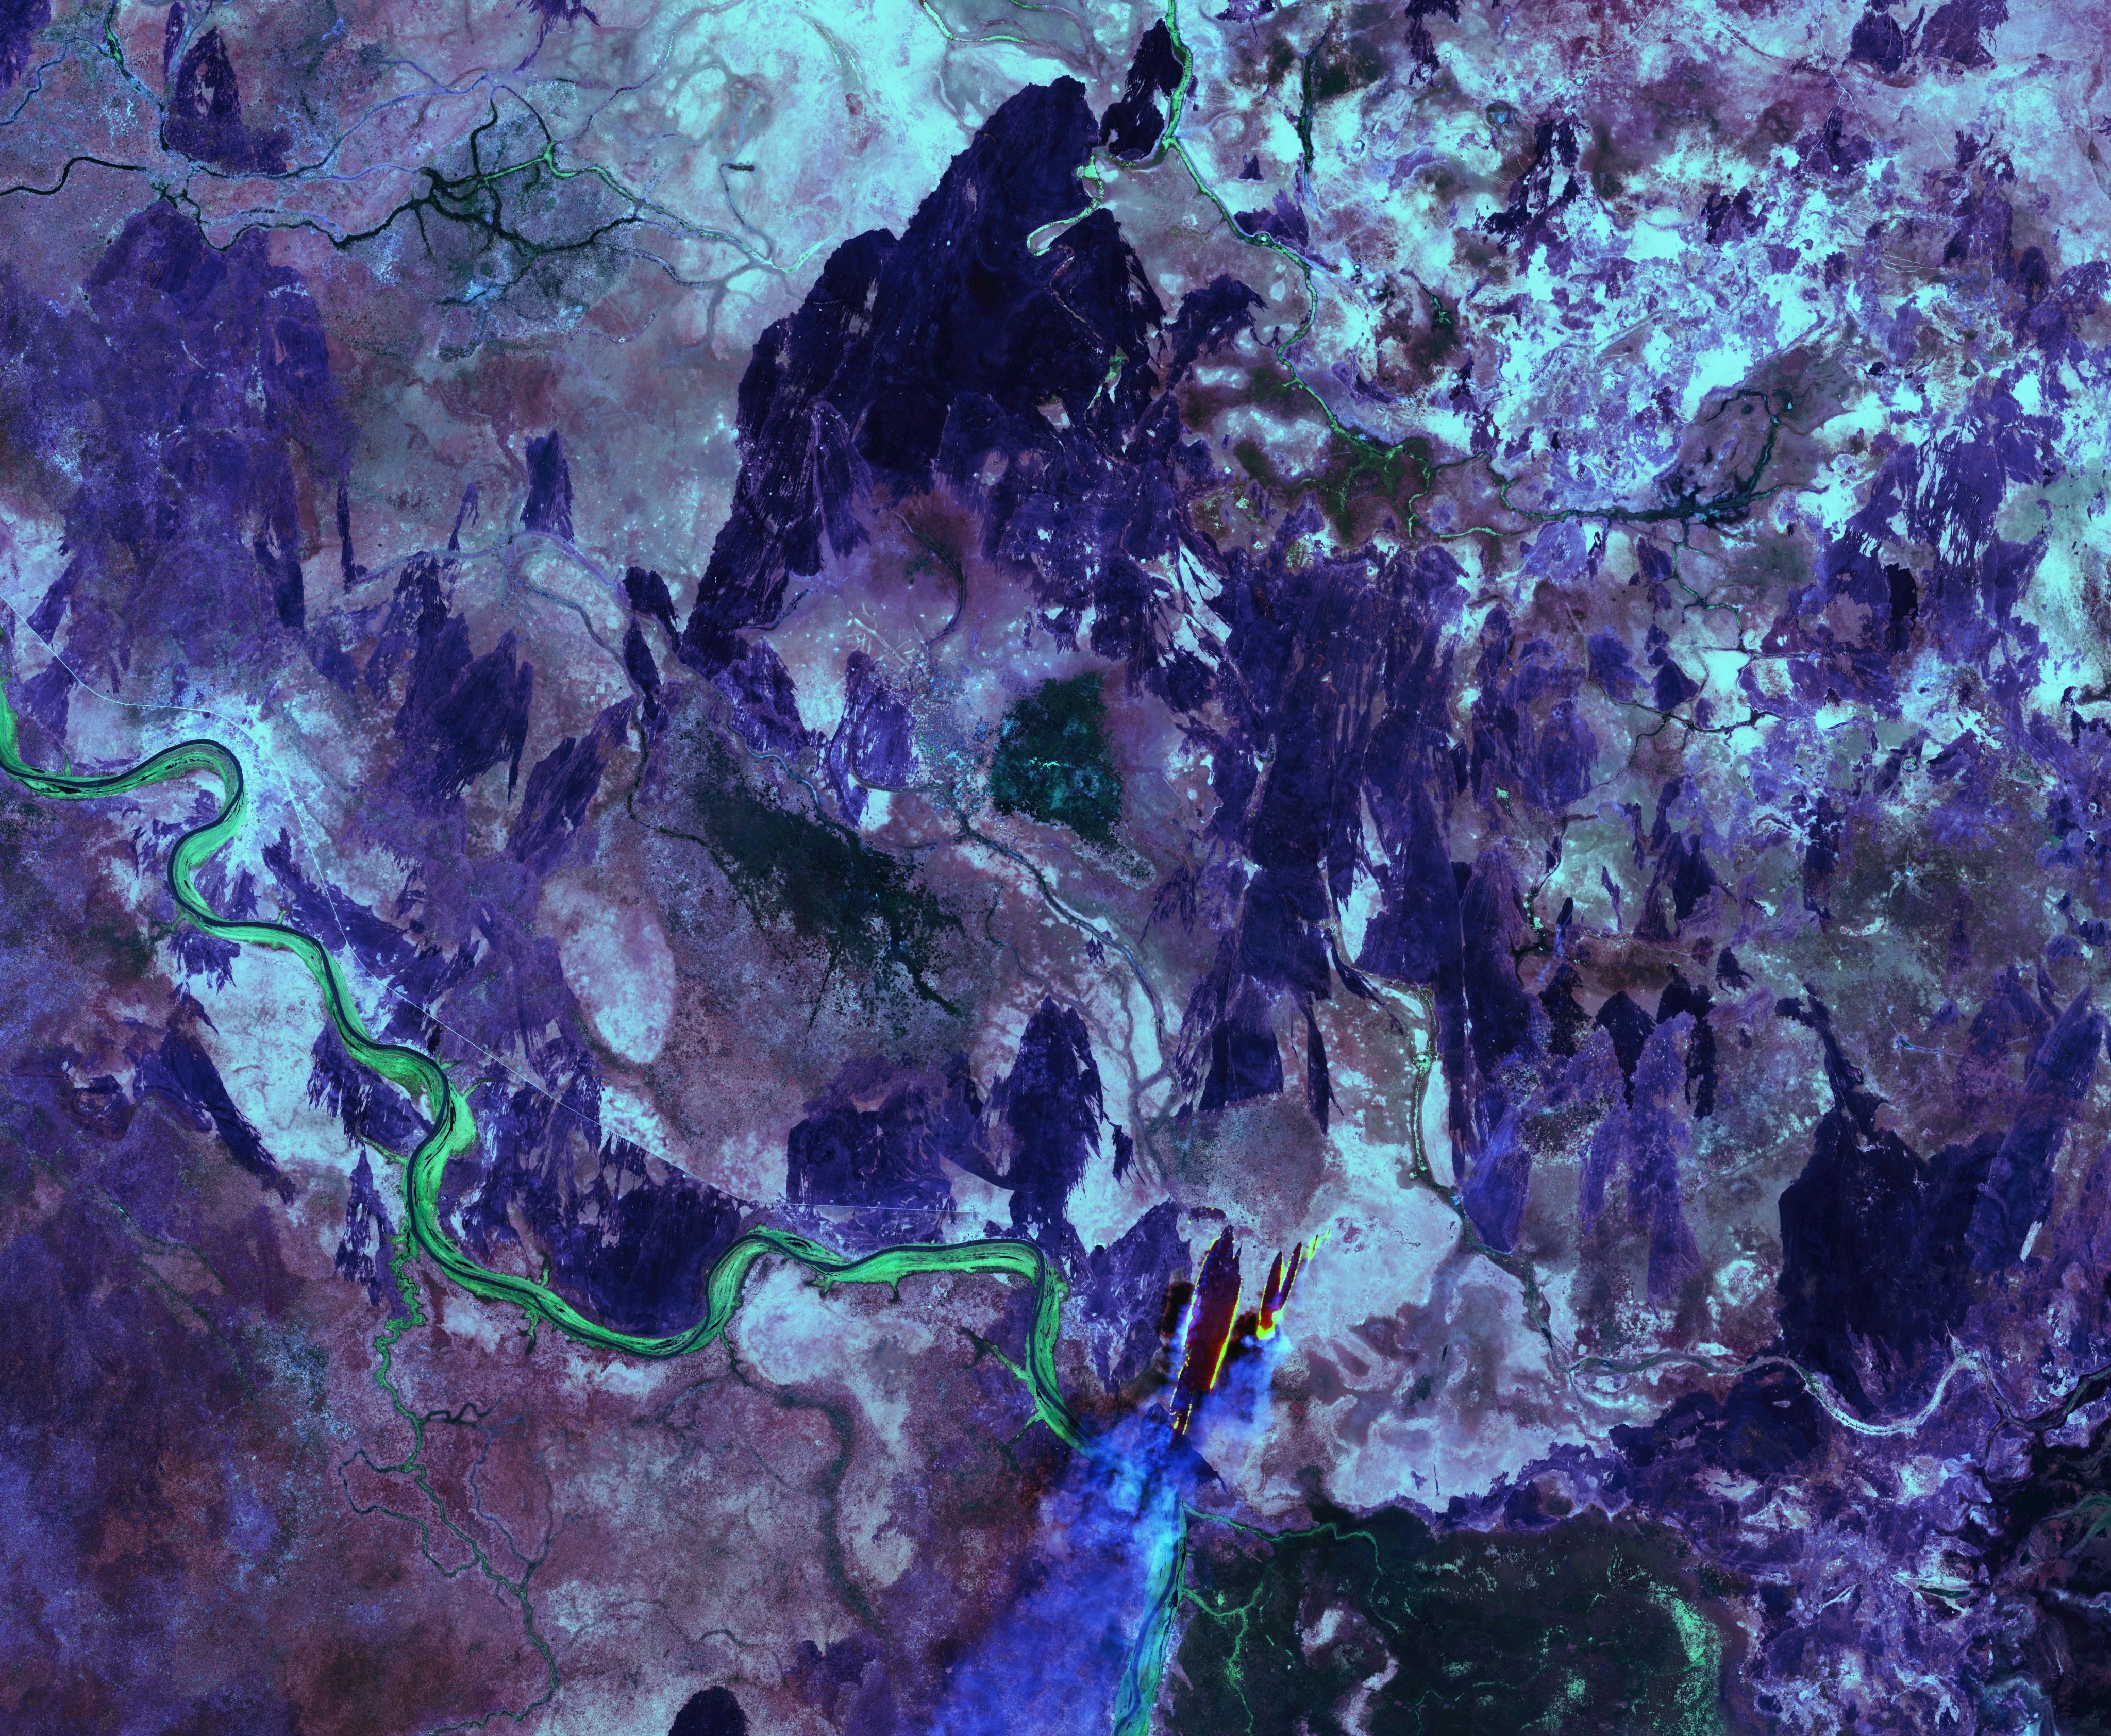 Satellite imagery of South Sudan. The Sobat river is traced in a vibrant green colour along the left part of the image. This is the most southerly of the great eastern tributaries of the White Nile, the section of the Nile between Malakal, South Sudan and Khartoum, Sudan. Tropical forests, swamps and grassland make up the majority of South Sudan’s terrain. 